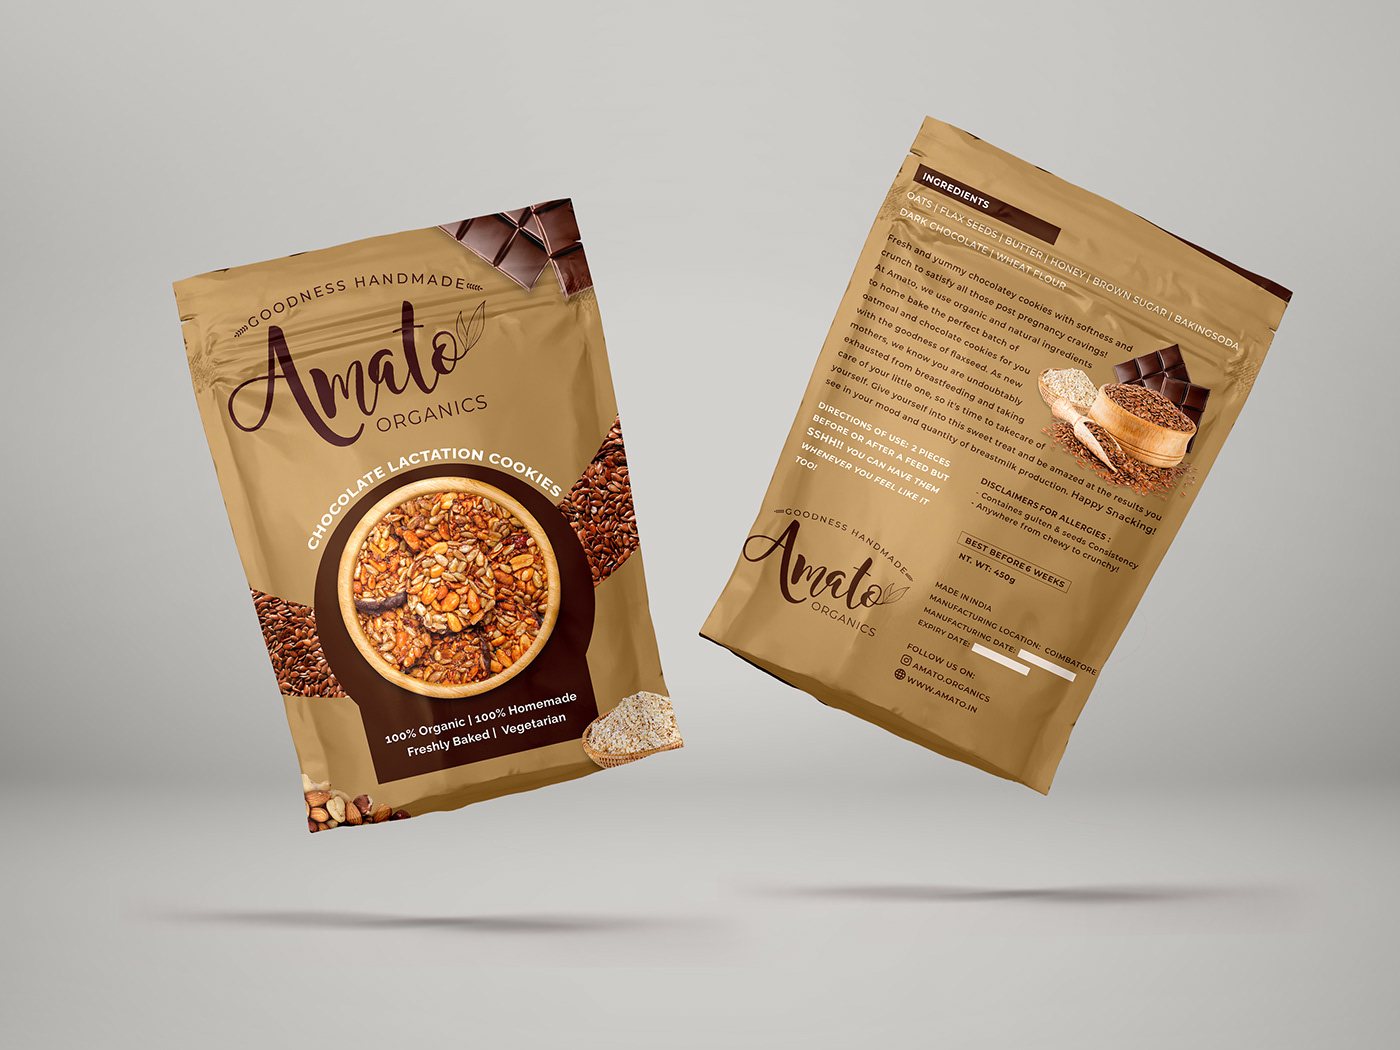 ads Advertising  brand identity campaign marketing   Mockup Packaging design Food  package design 